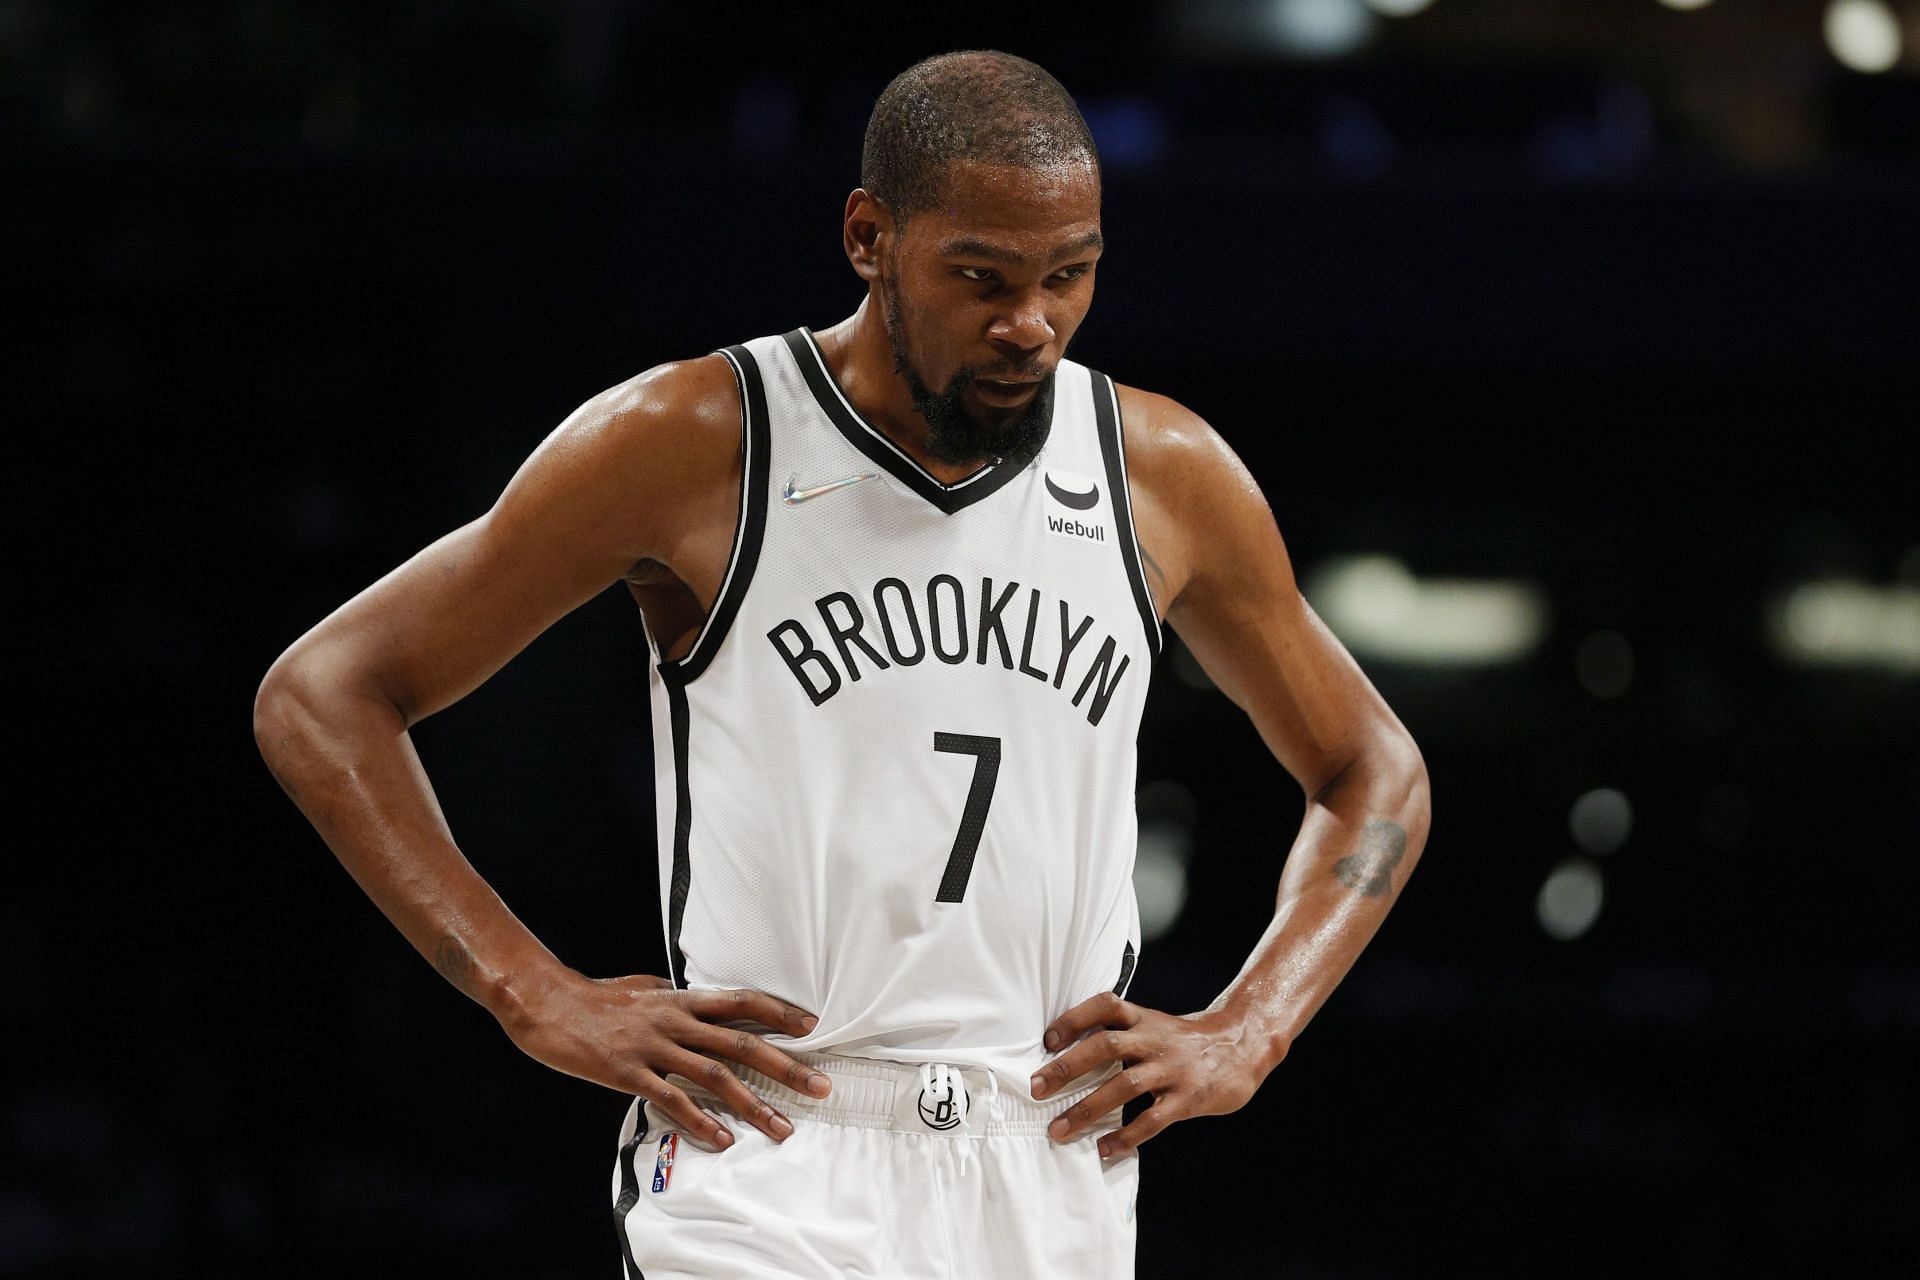 Brooklyn Nets star Kevin Durant is acknowledged as the best player in the w